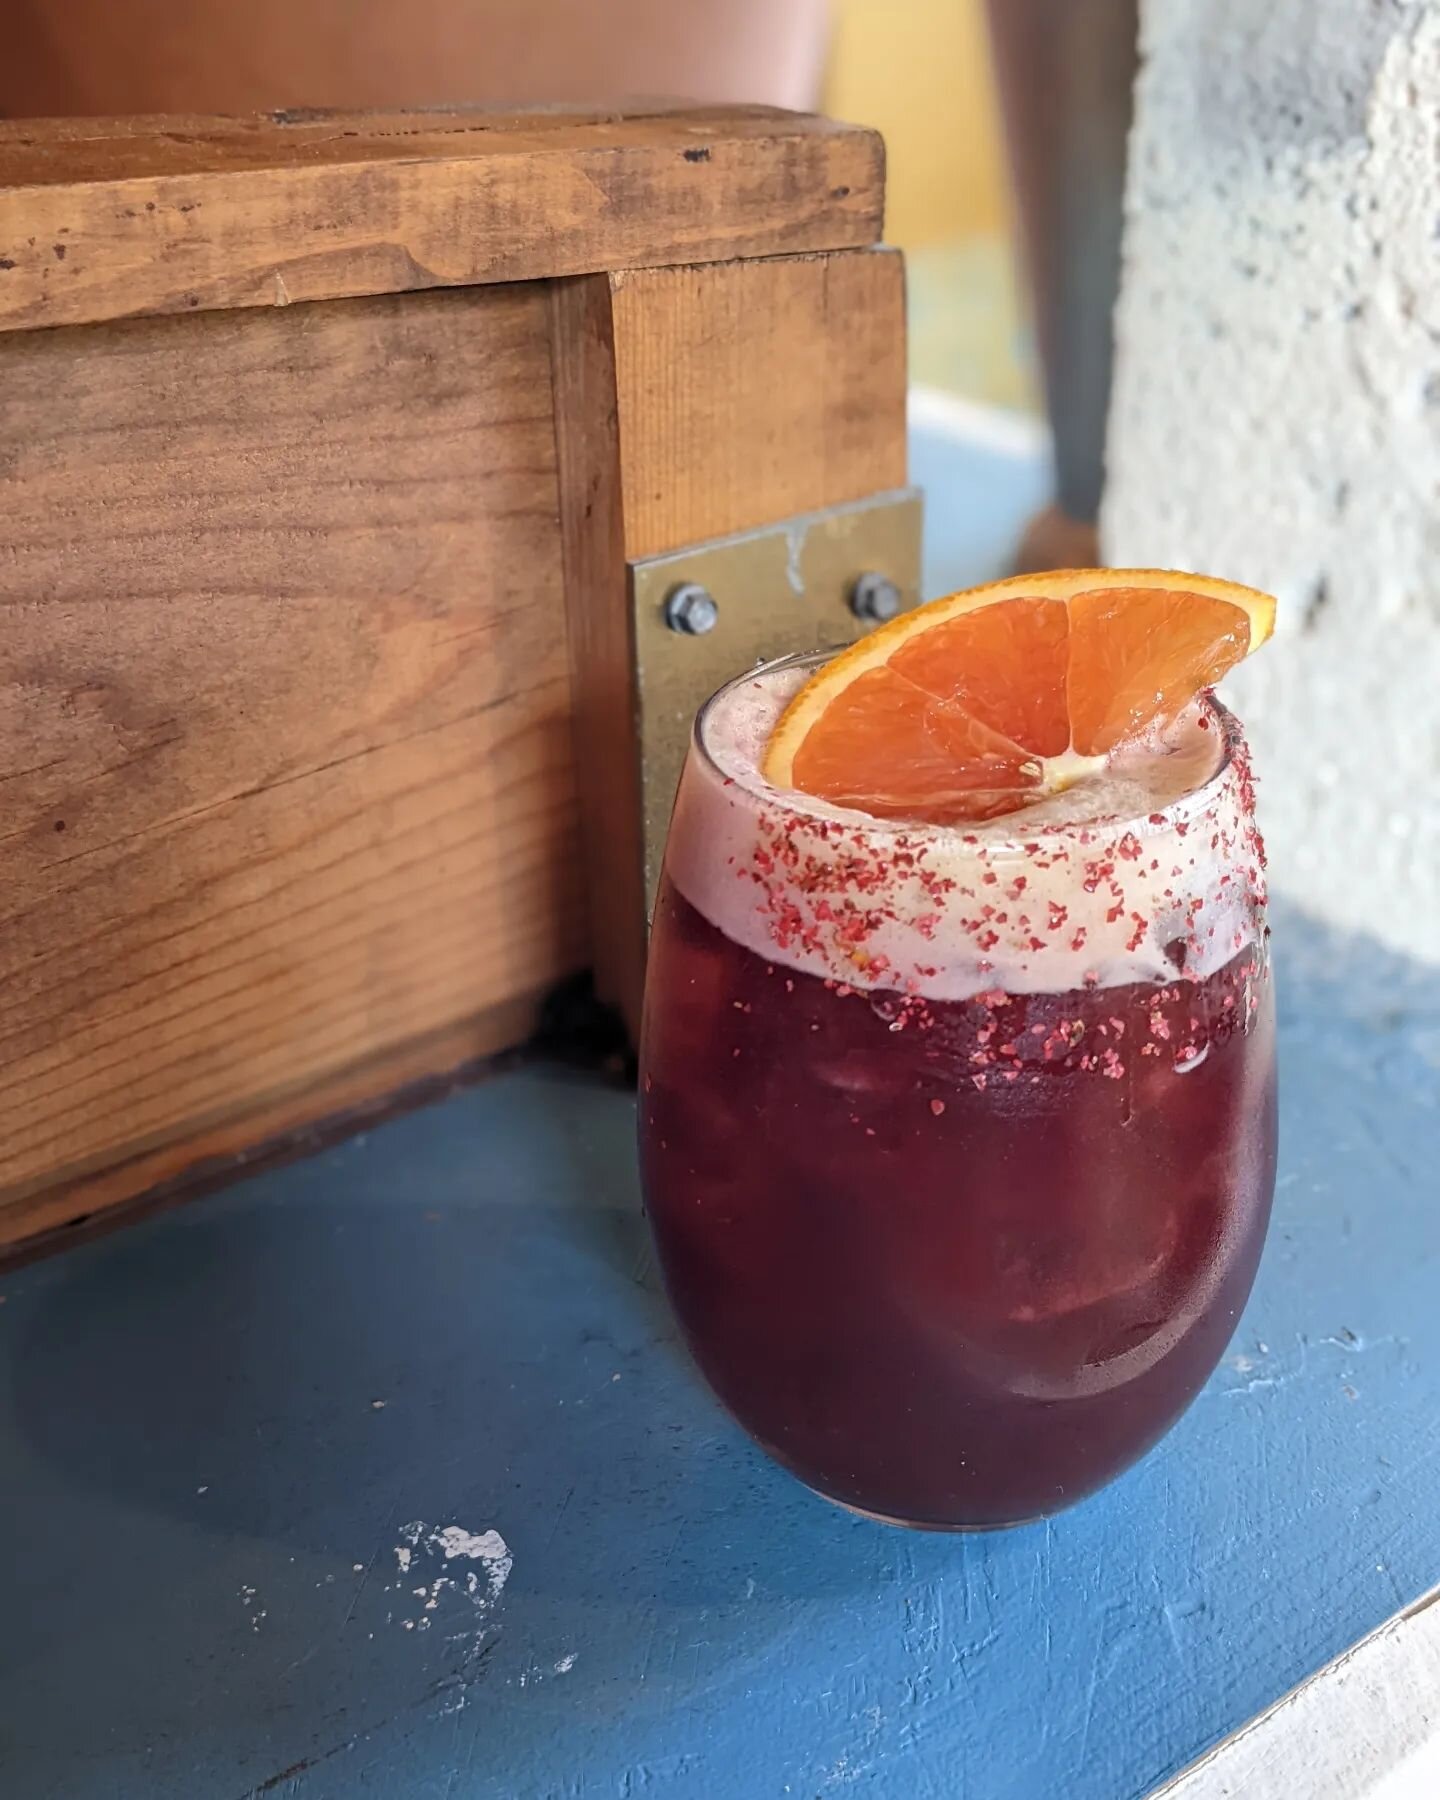 New cocktail menu out today!

Lots of great stuff including this Basque(ing) Beauty.  It tasty take on a classic Spanish kalimotxo featuring @averna

Come check out your new fave!